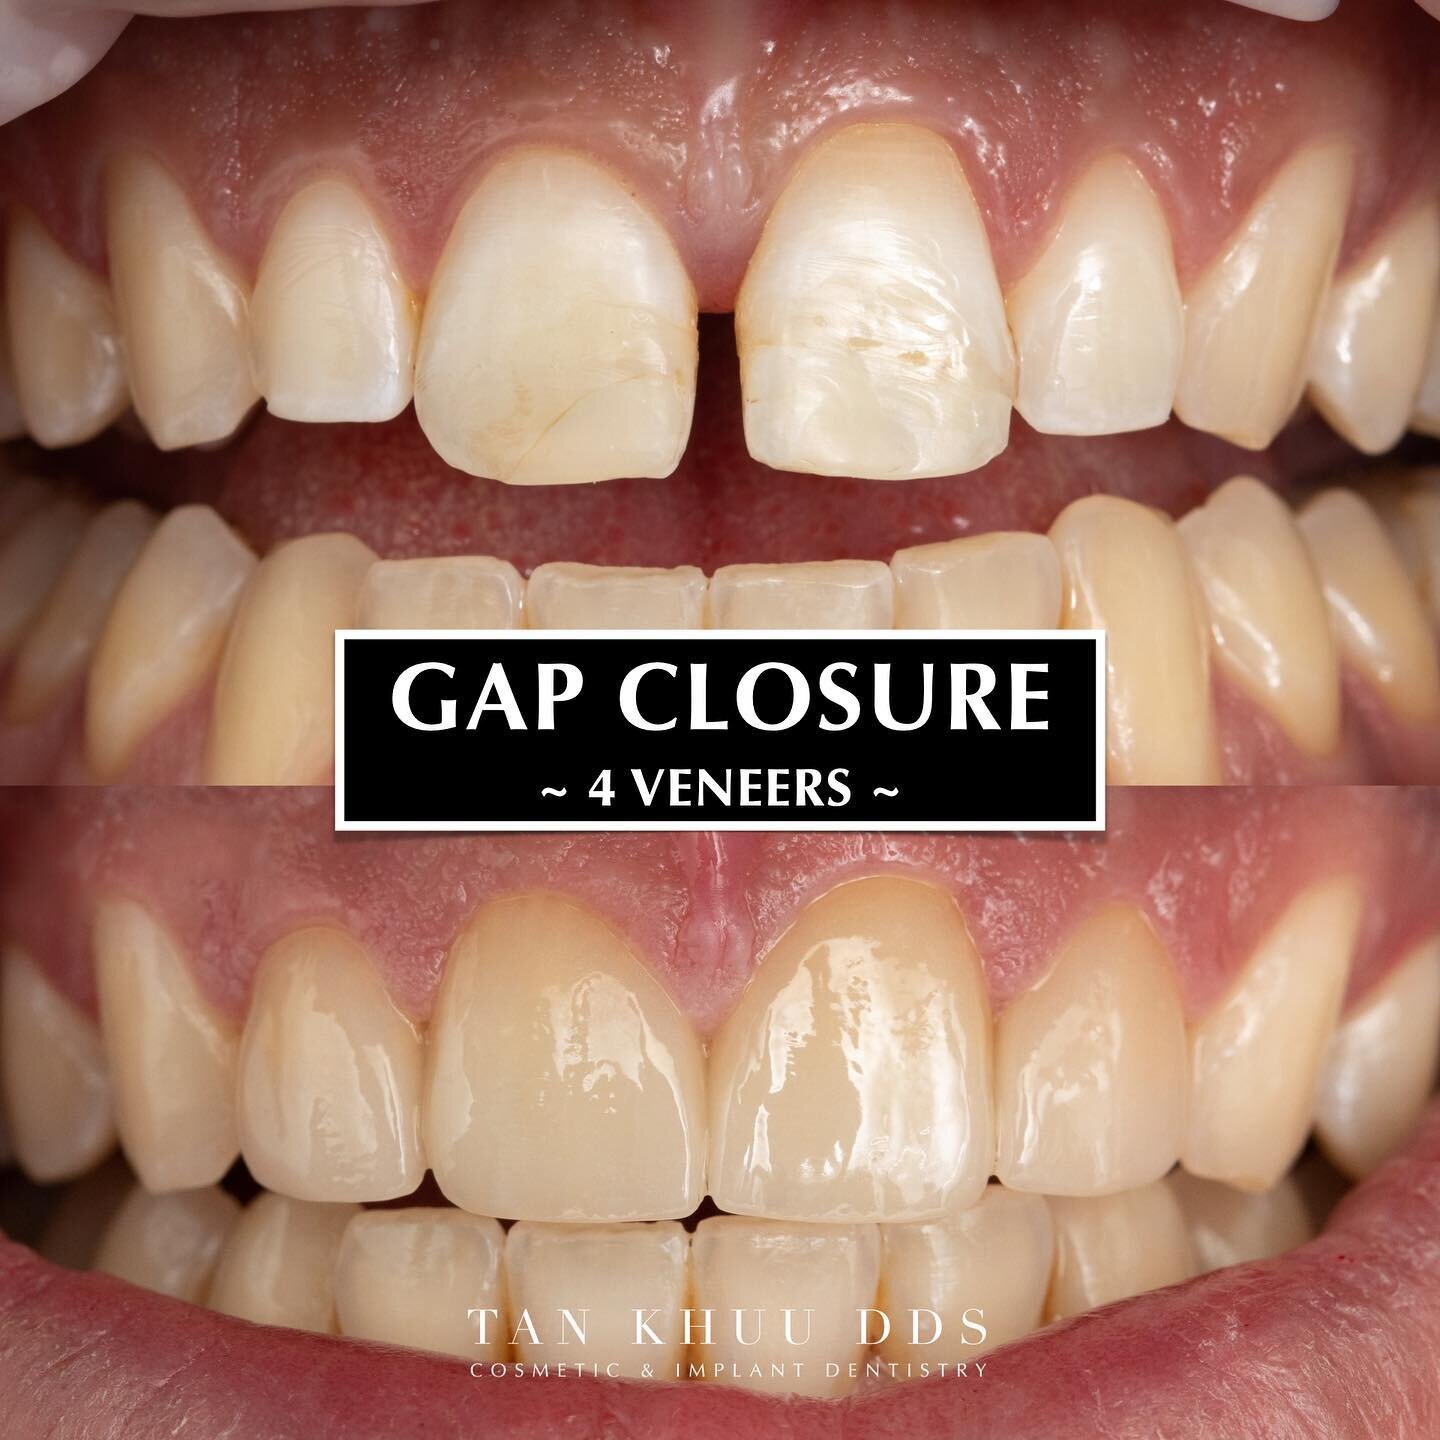 Say goodbye to gaps and hello to a stunning smile! ✨🌟 

This incredible cosmetic case was all about closing the gap between the front teeth and giving our patient the smile of their dreams. 

With a precise design of four veneers, we achieved amazin